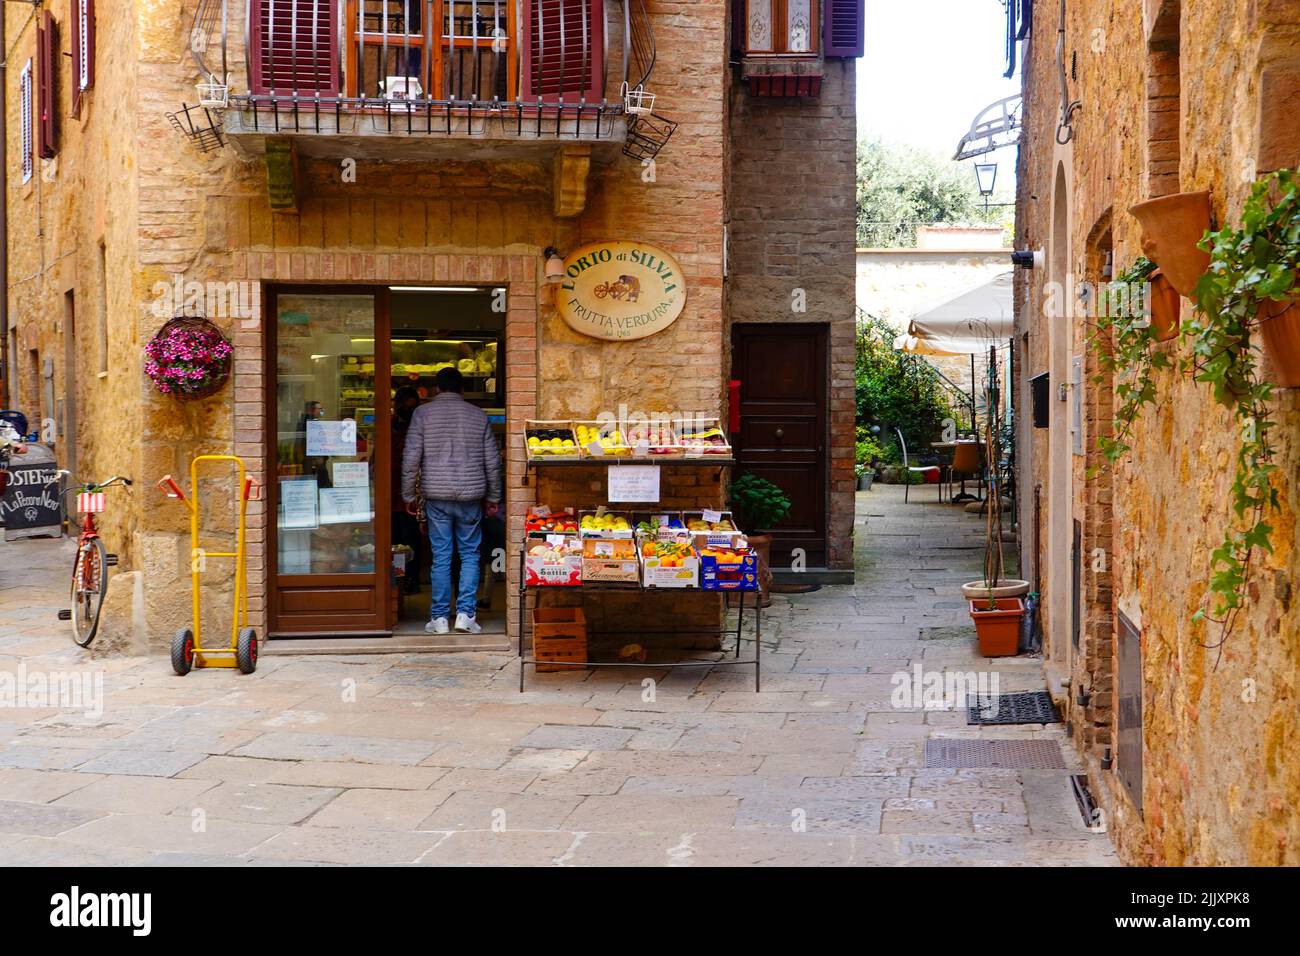 People entering the L’Orto di Silvia fruit and vegetable market located in the Val d’Orcia hill town of Pienza, Italy, in the heart of Tuscany. Stock Photo